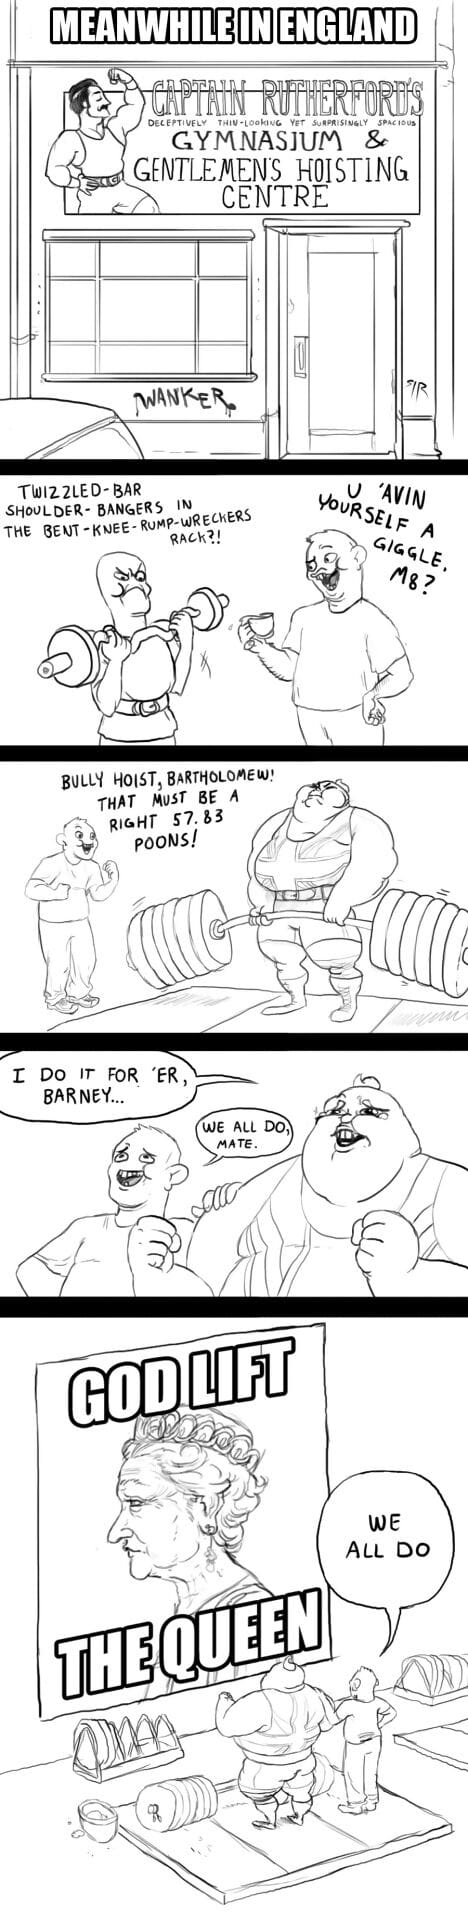 /fit/ strips page 1